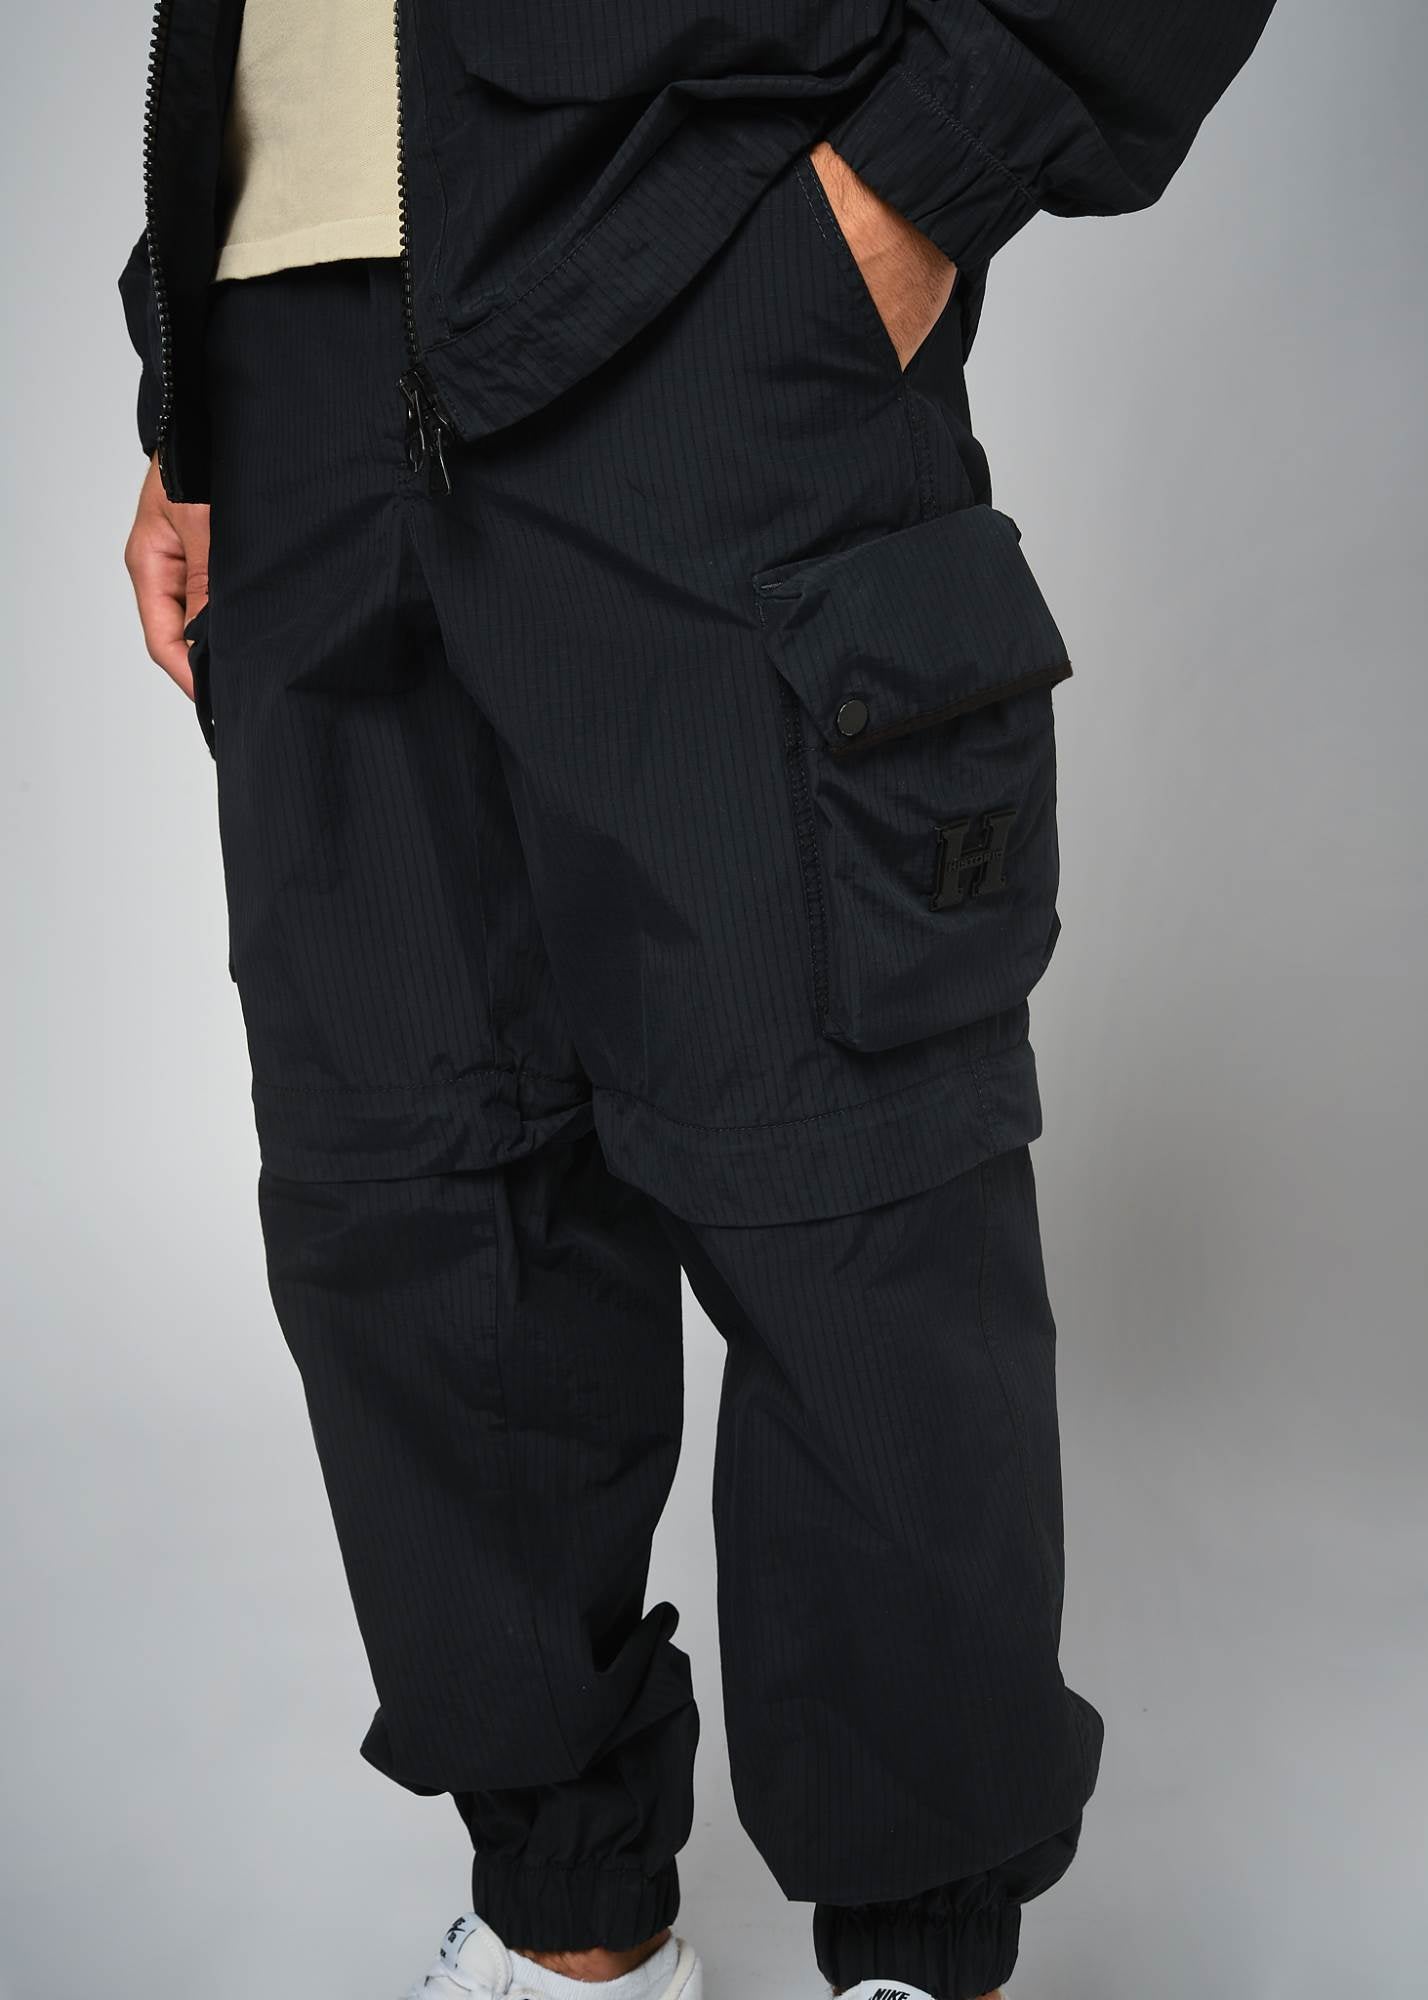 Endeavour Trousers - Historic Brand